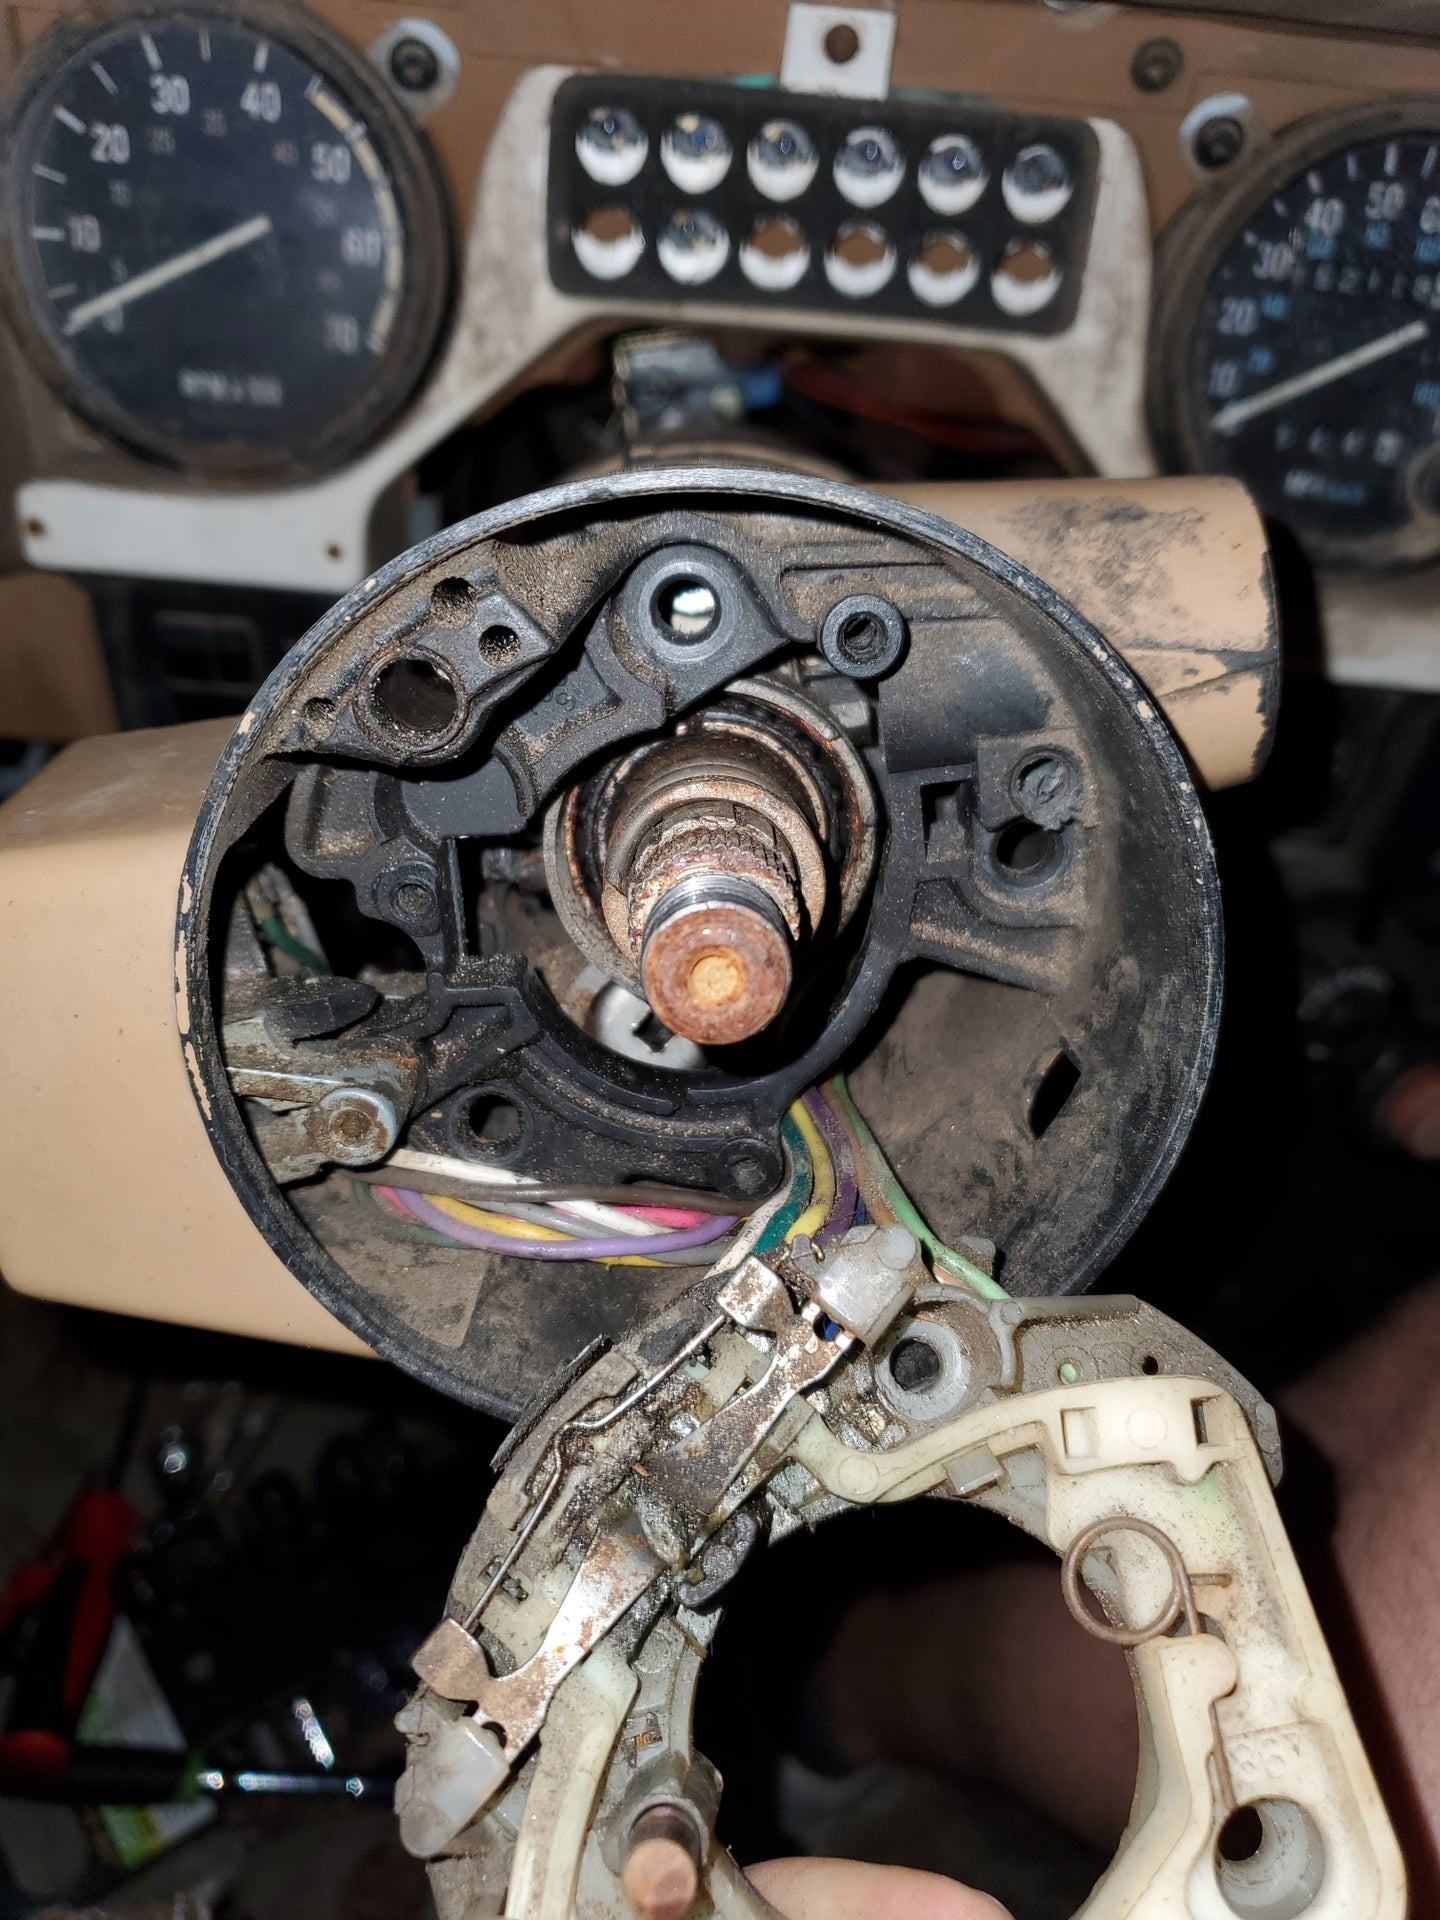 YJ Steering Cloumn Ignition Issue | Jeep Wrangler Forum